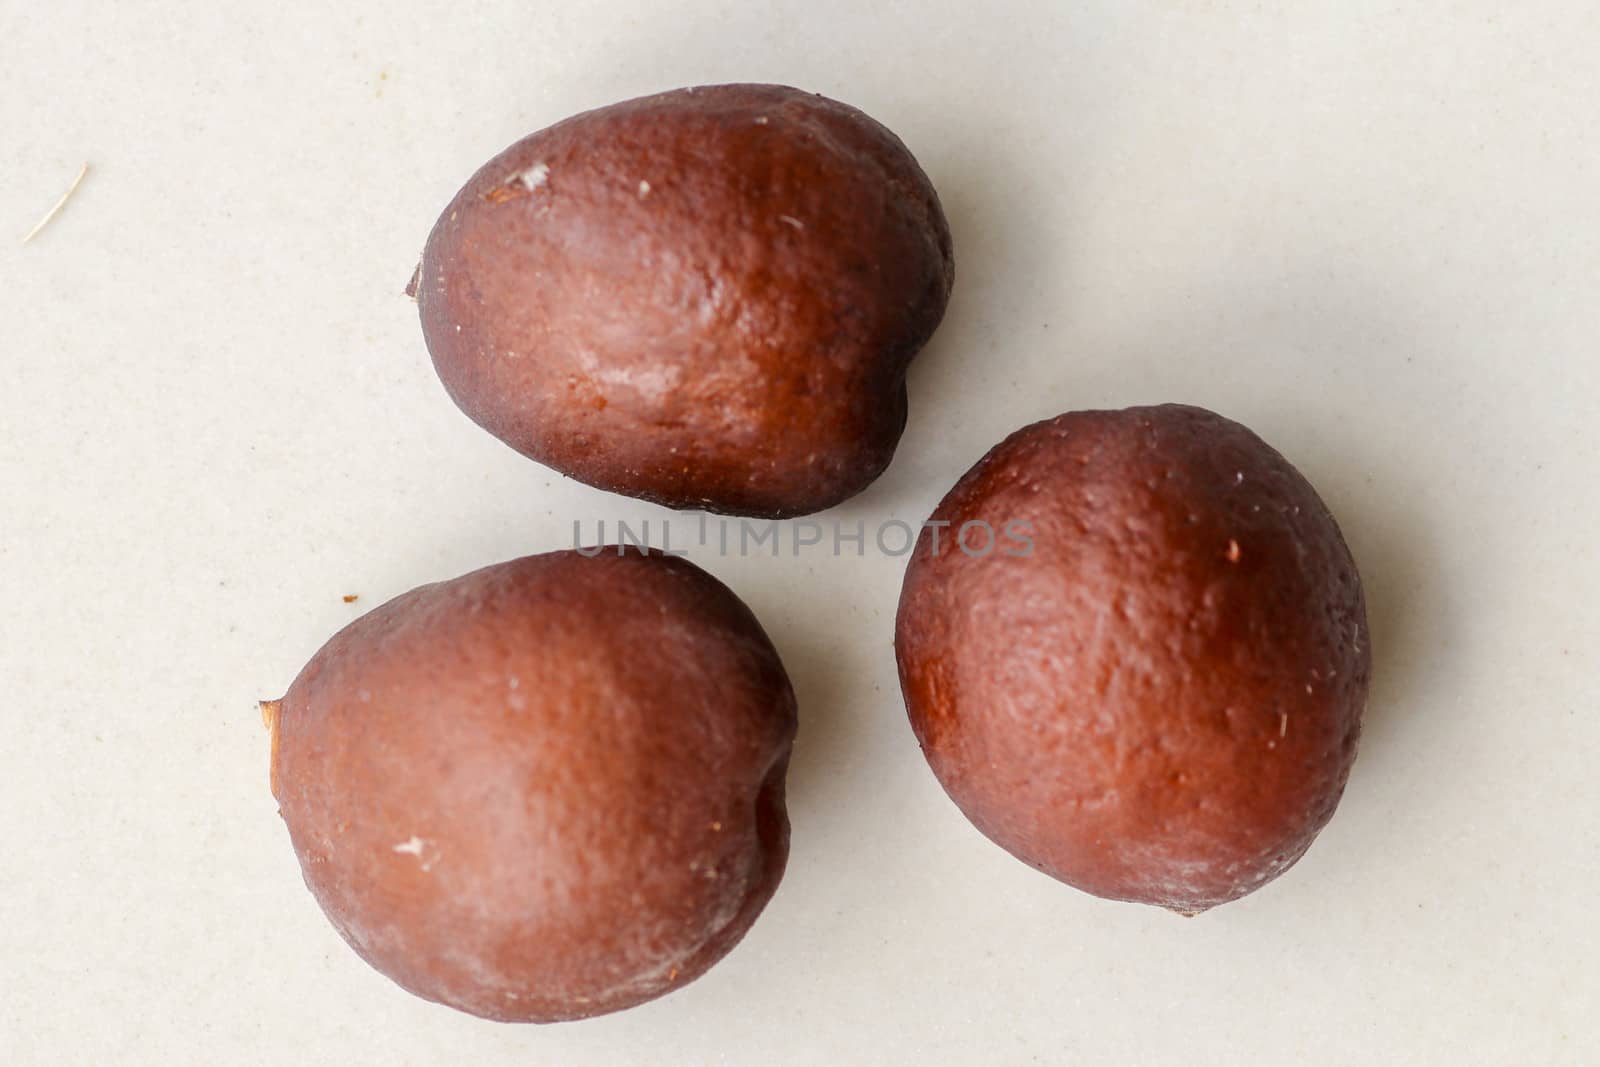 Snake fruit seeds on a white background. Close up of seeds. Salak is a fruit which in Indonesia has almost the same fruit skin as snake skin. The taste of the fruit is delicious.